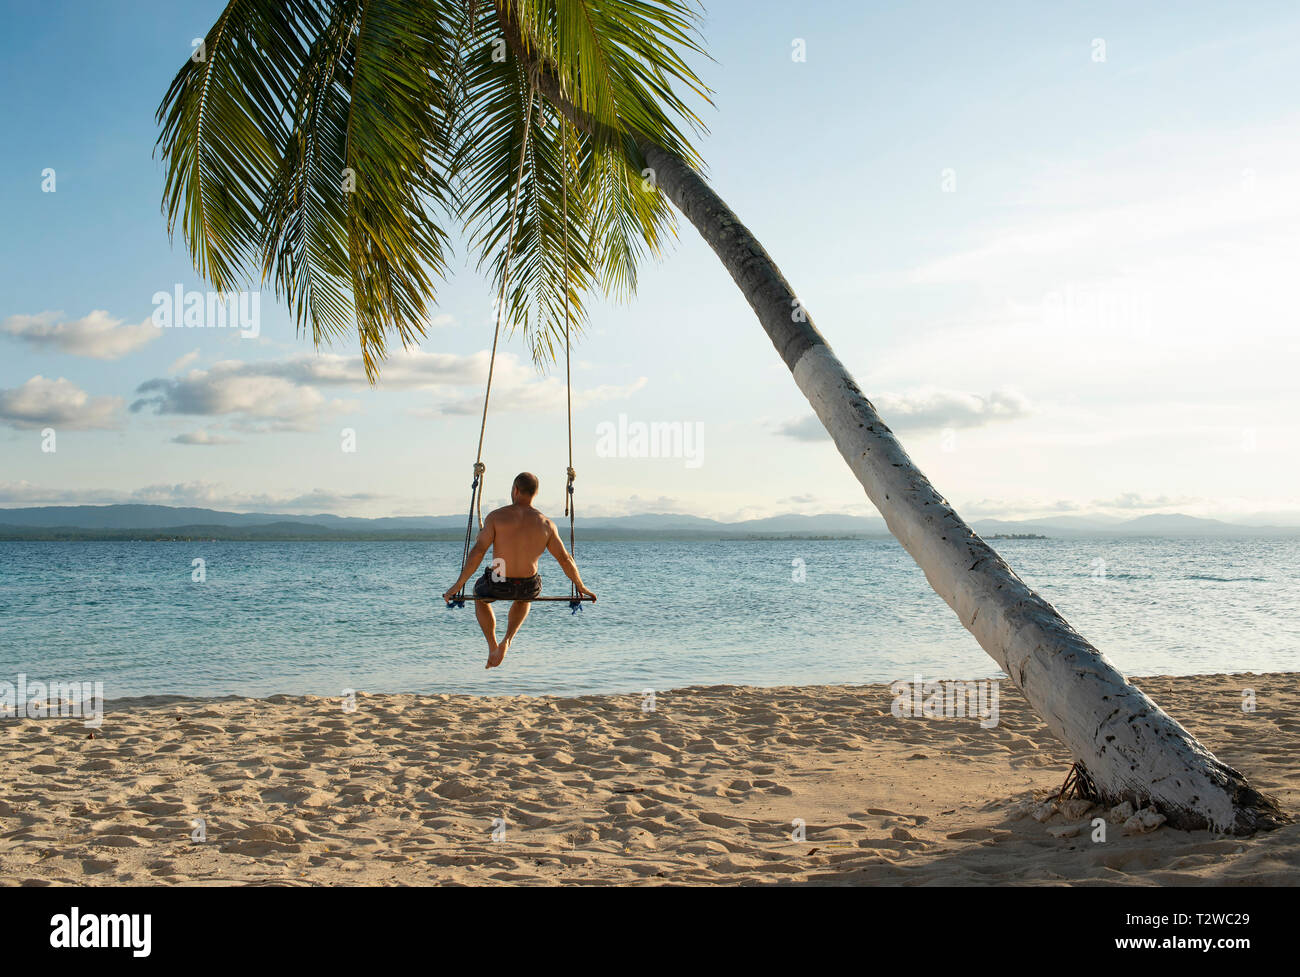 Rear view of man in a beach swing attached to a palm tree in San Blas Islands. Travel destination, lifestyle / holiday concept. Panama, Oct 2018 Stock Photo